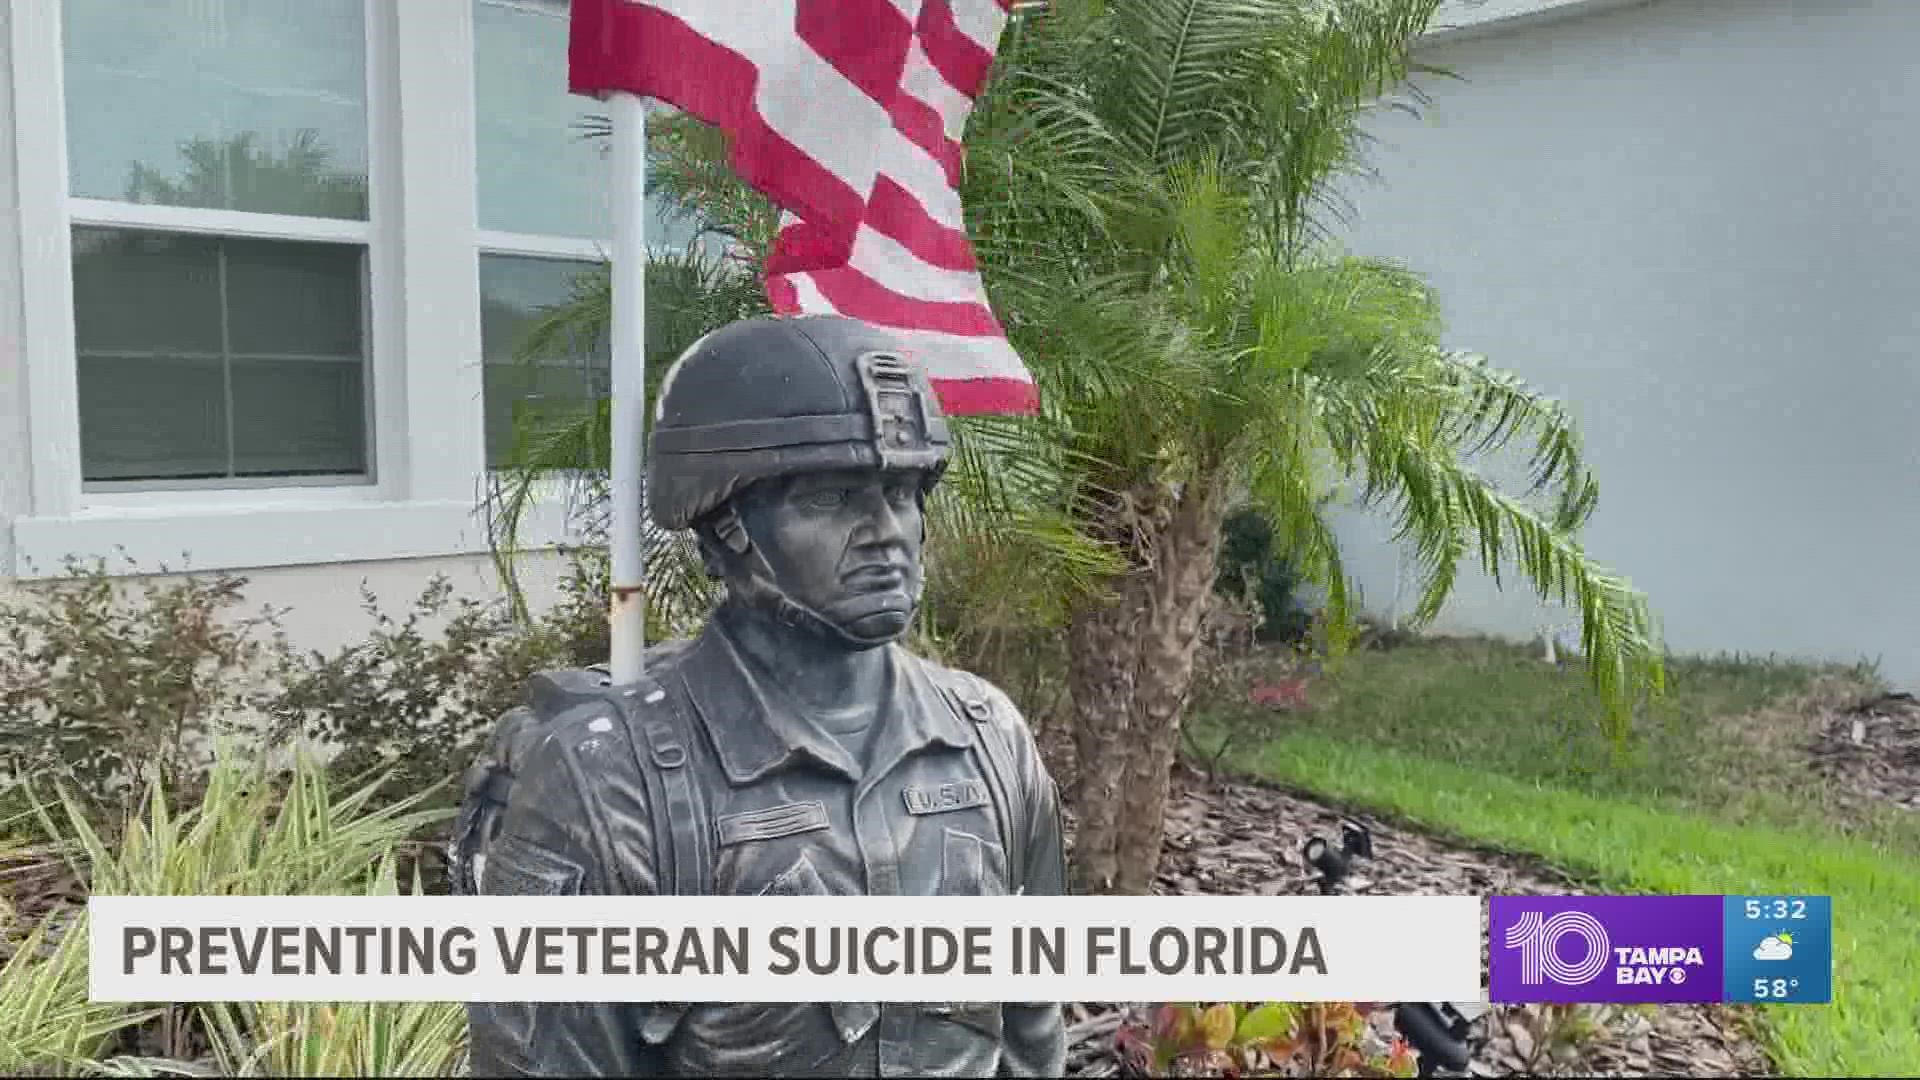 The Fire Watch tracks veteran suicides in Florida and offers free training to anyone to help them spot a veteran in emotional distress and find resources.